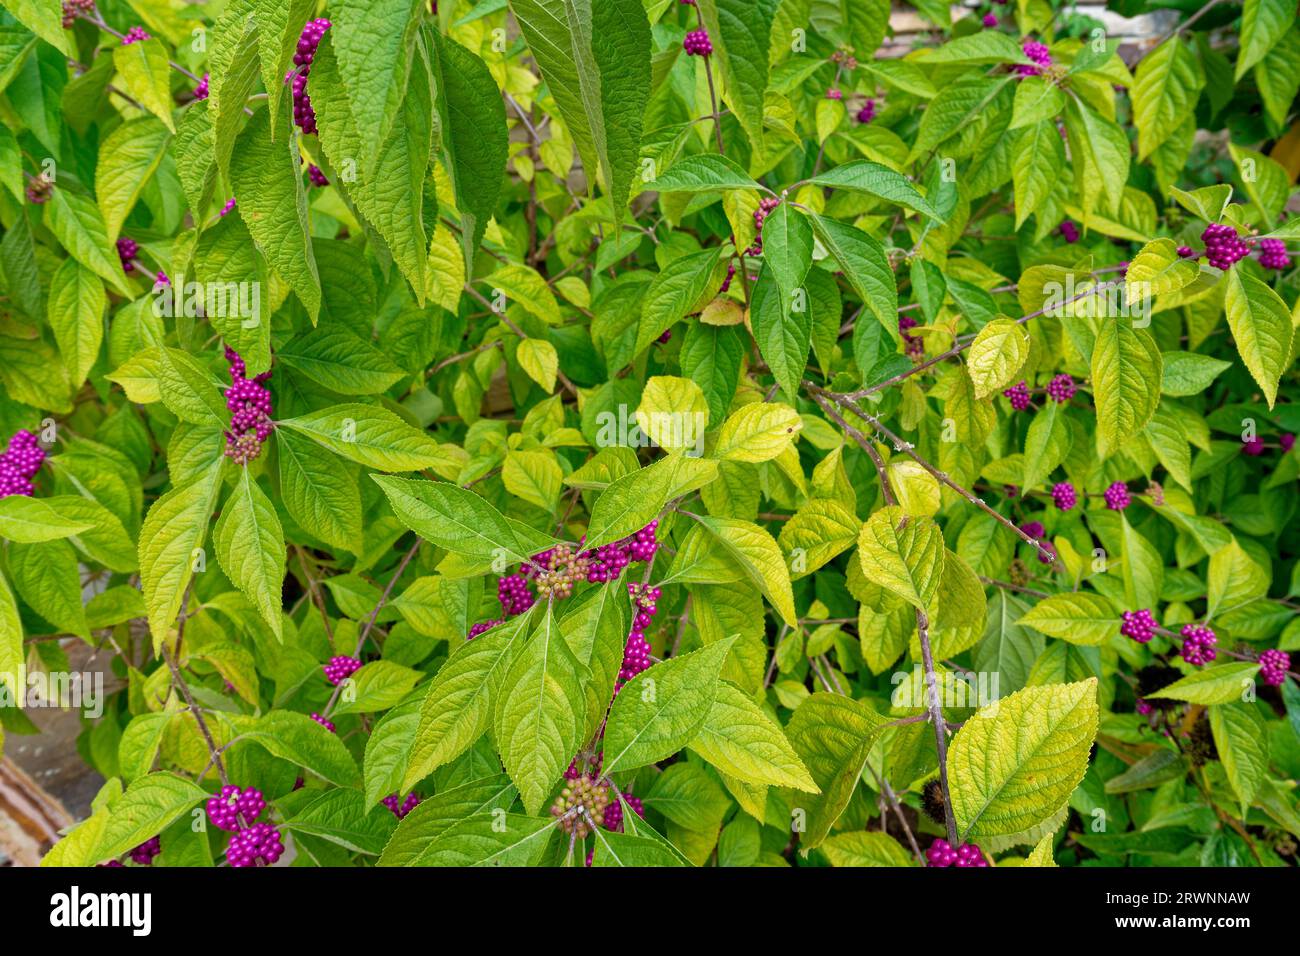 A colorful bright green foliage with clusters of irrdescent purple berries on the branches of a American beautyberry shrub in September Stock Photo